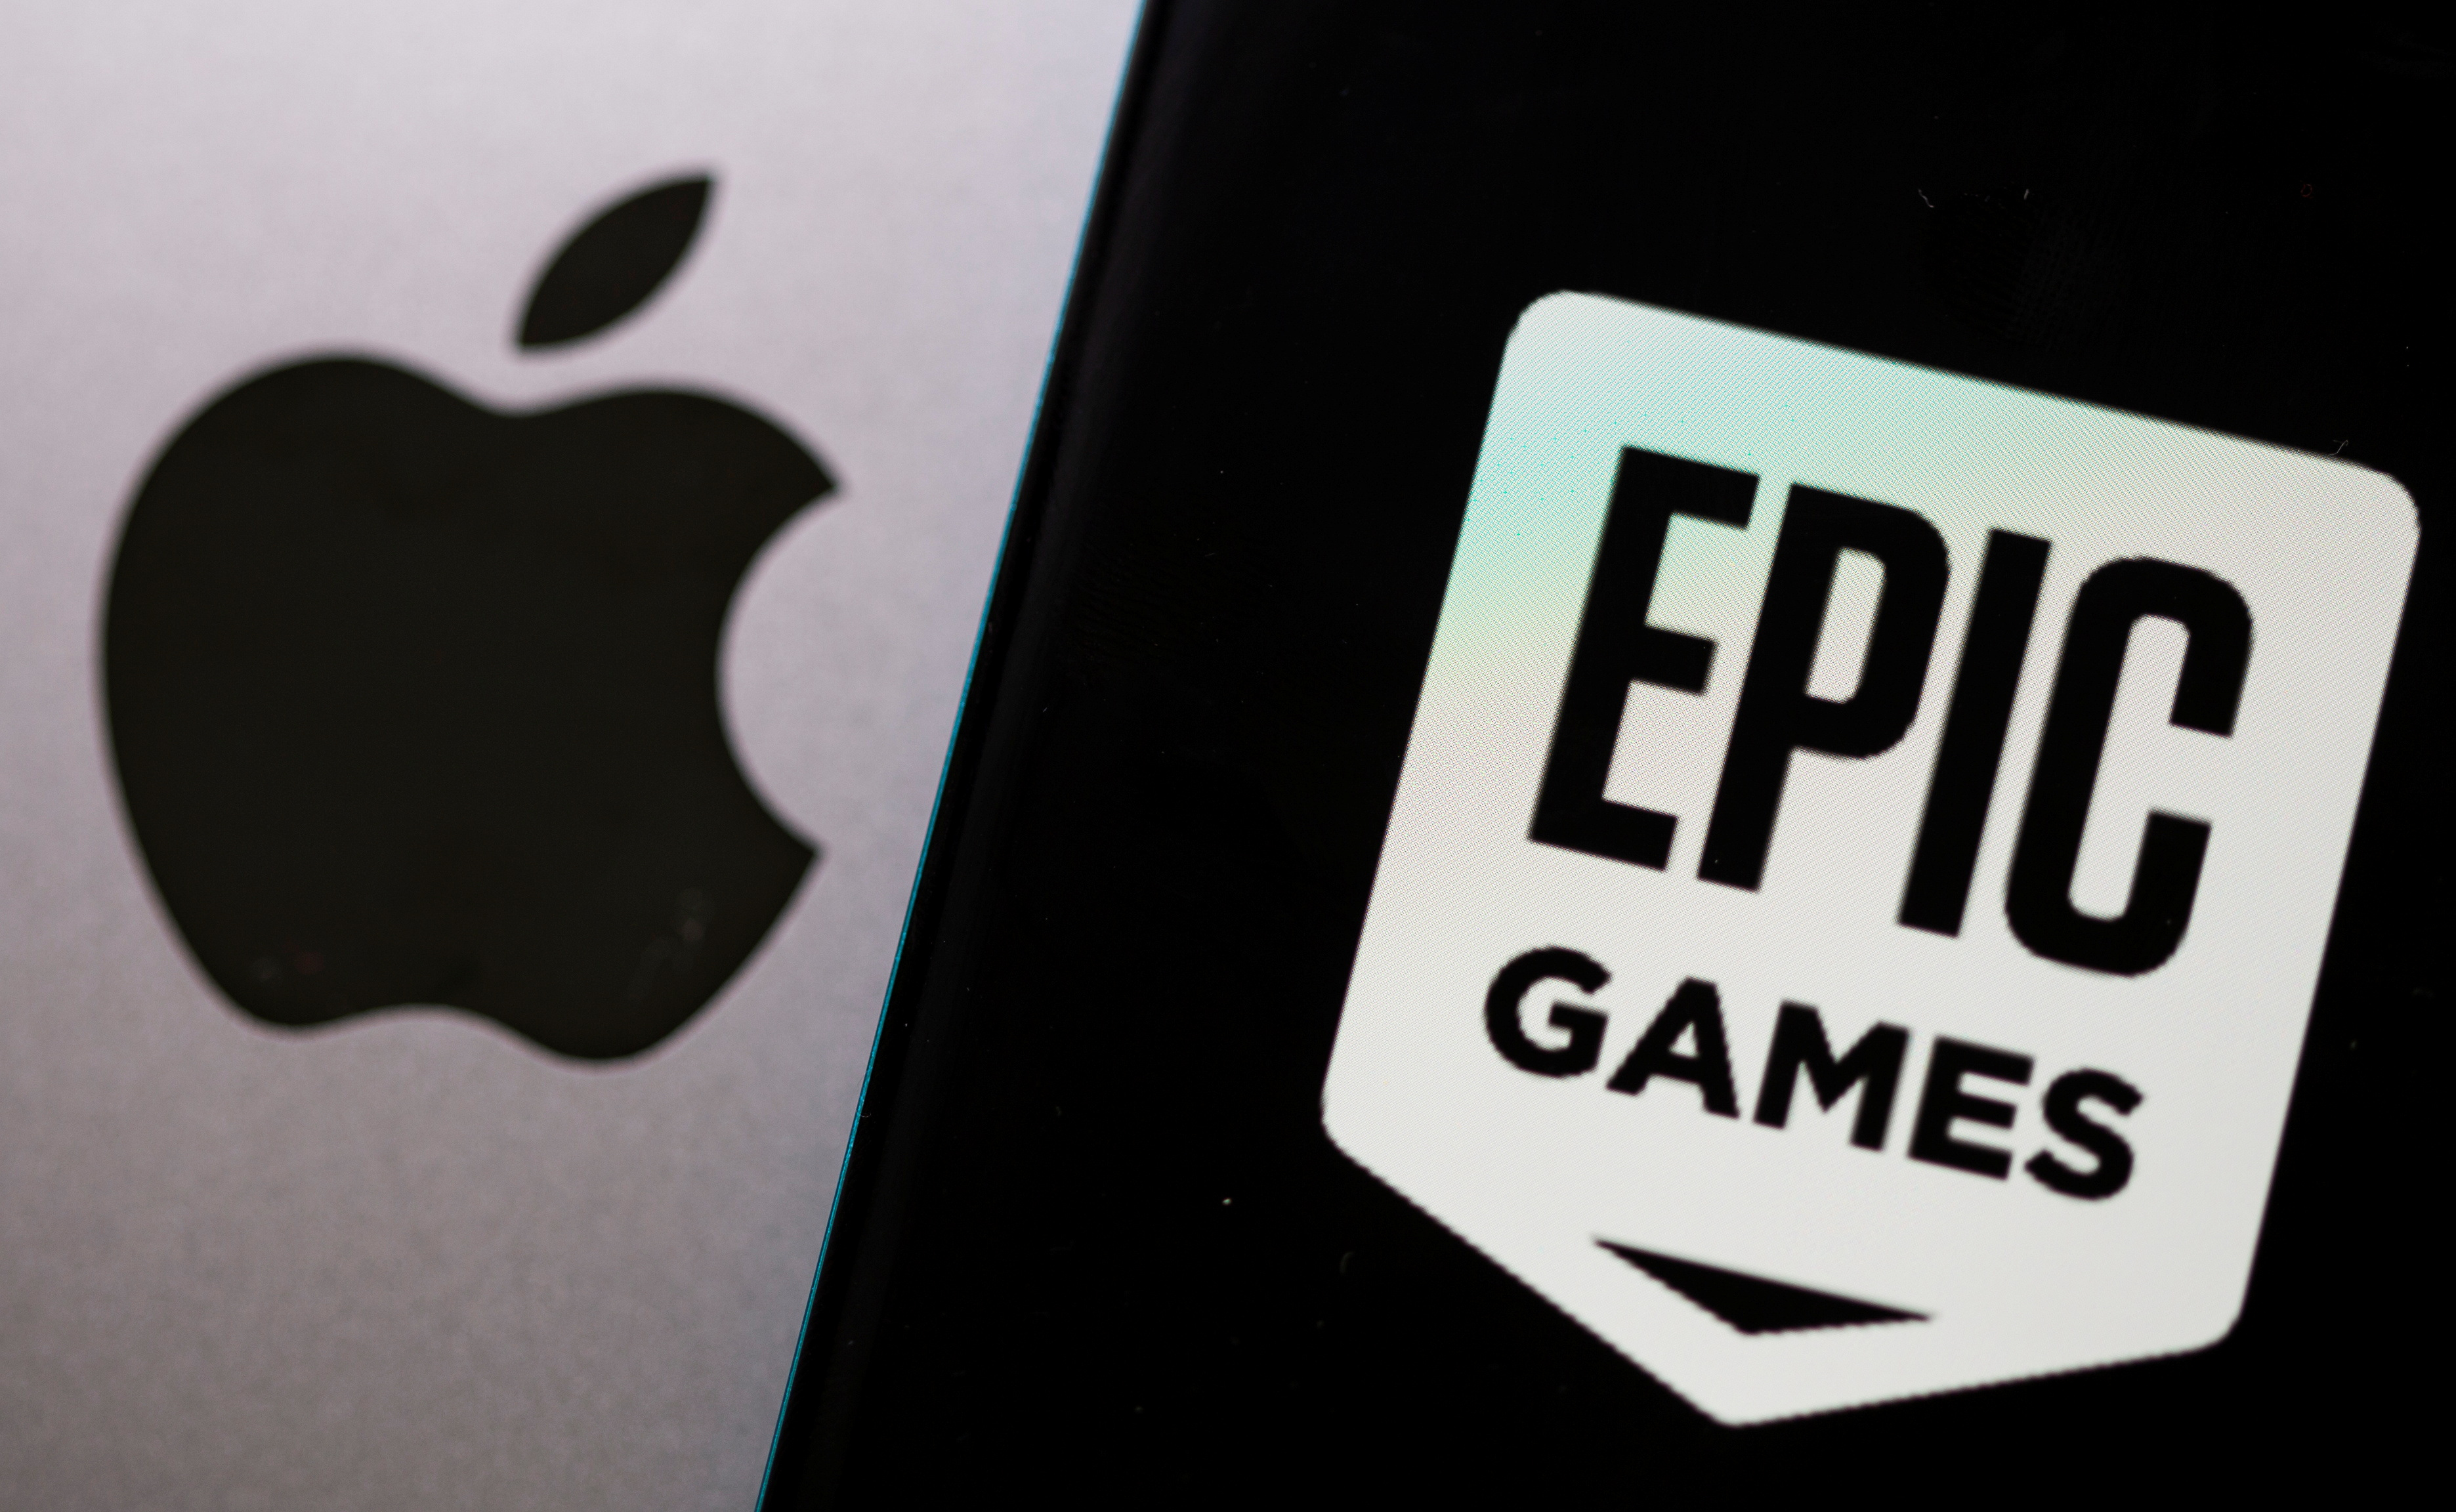 Smartphone with Epic Games logo is seen in front of Apple log.